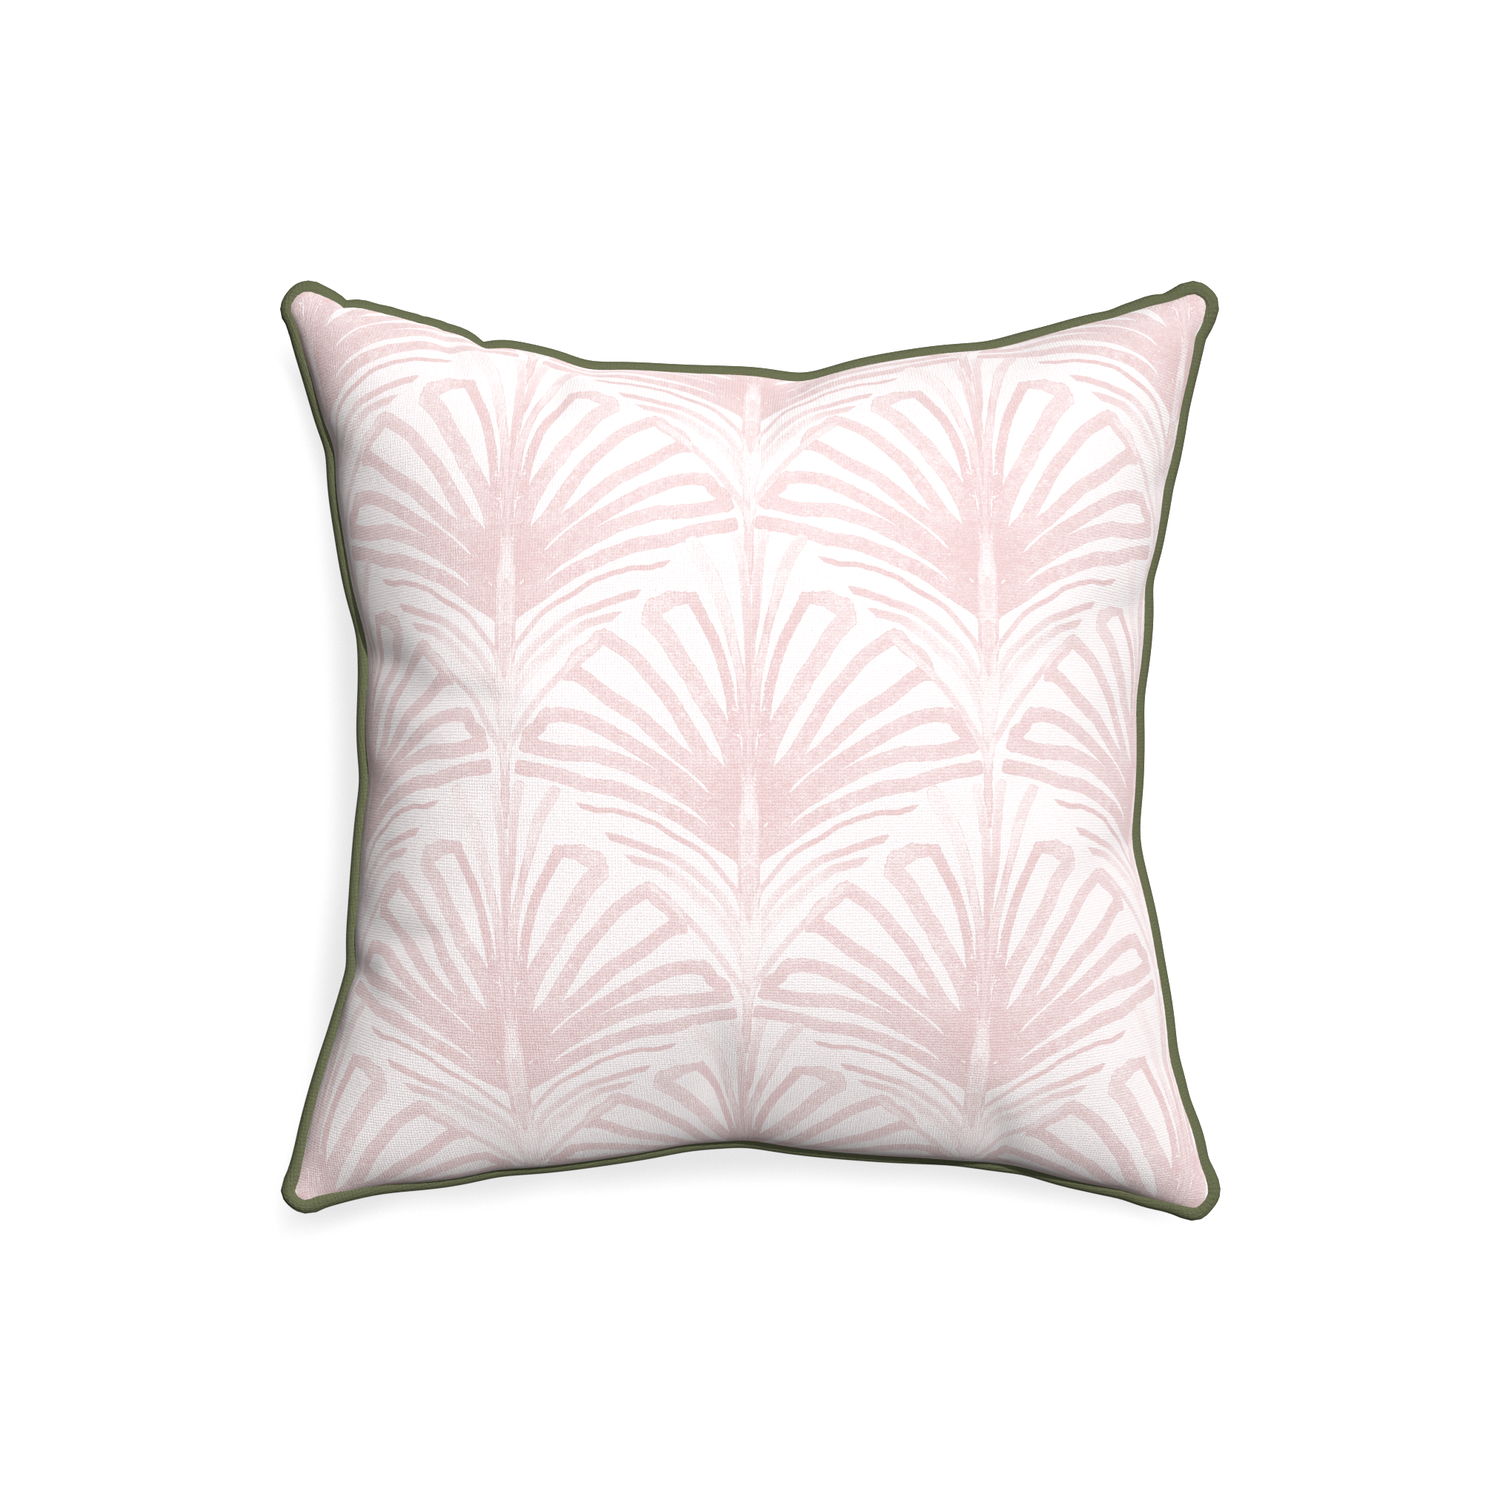 20-square suzy rose custom pillow with f piping on white background